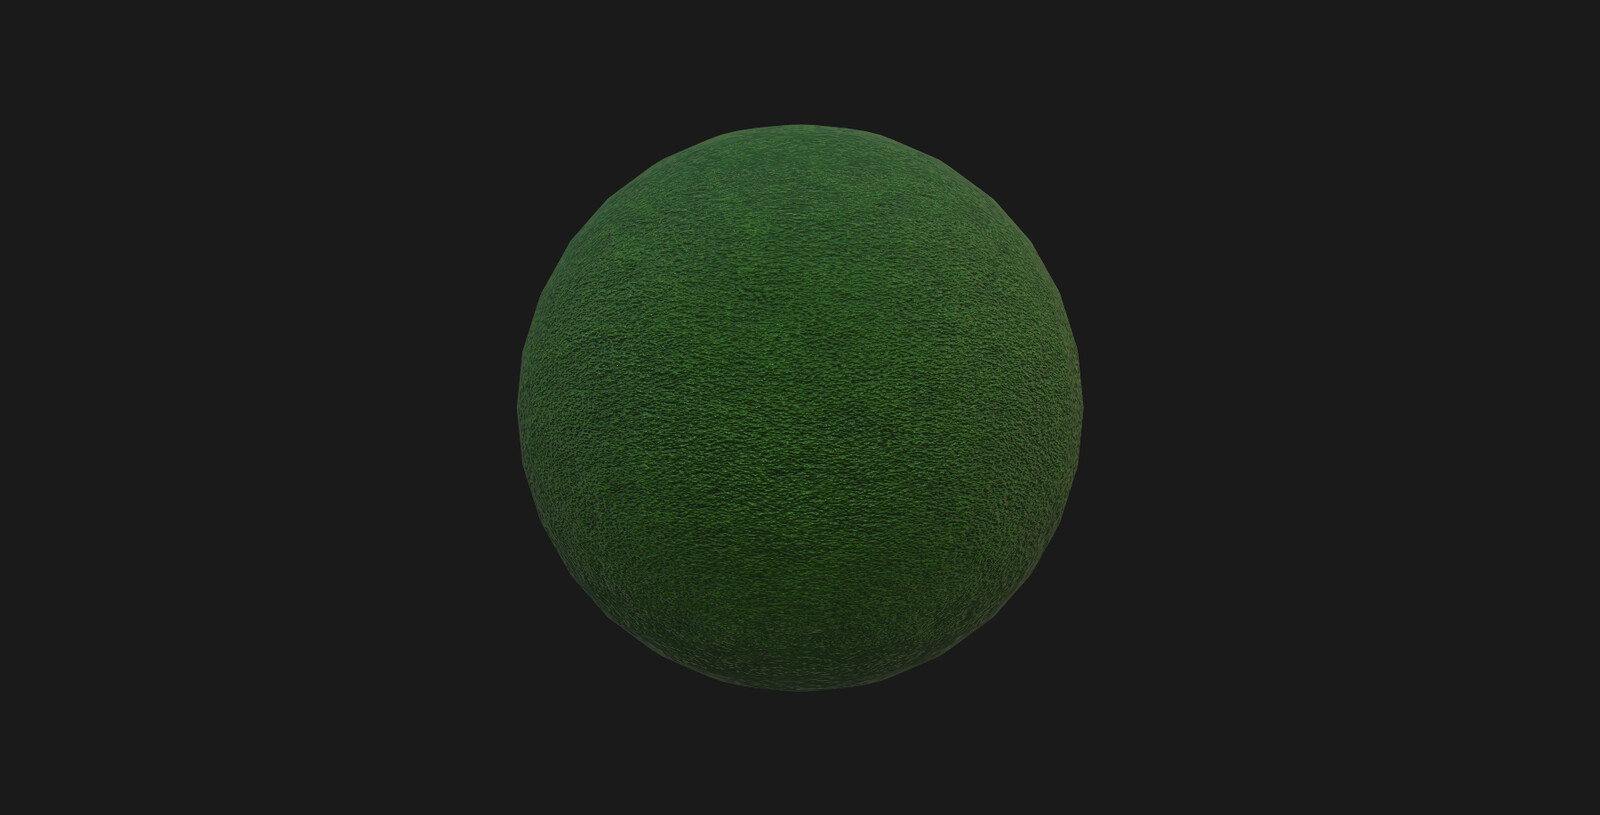 Renderd with shadermap 4